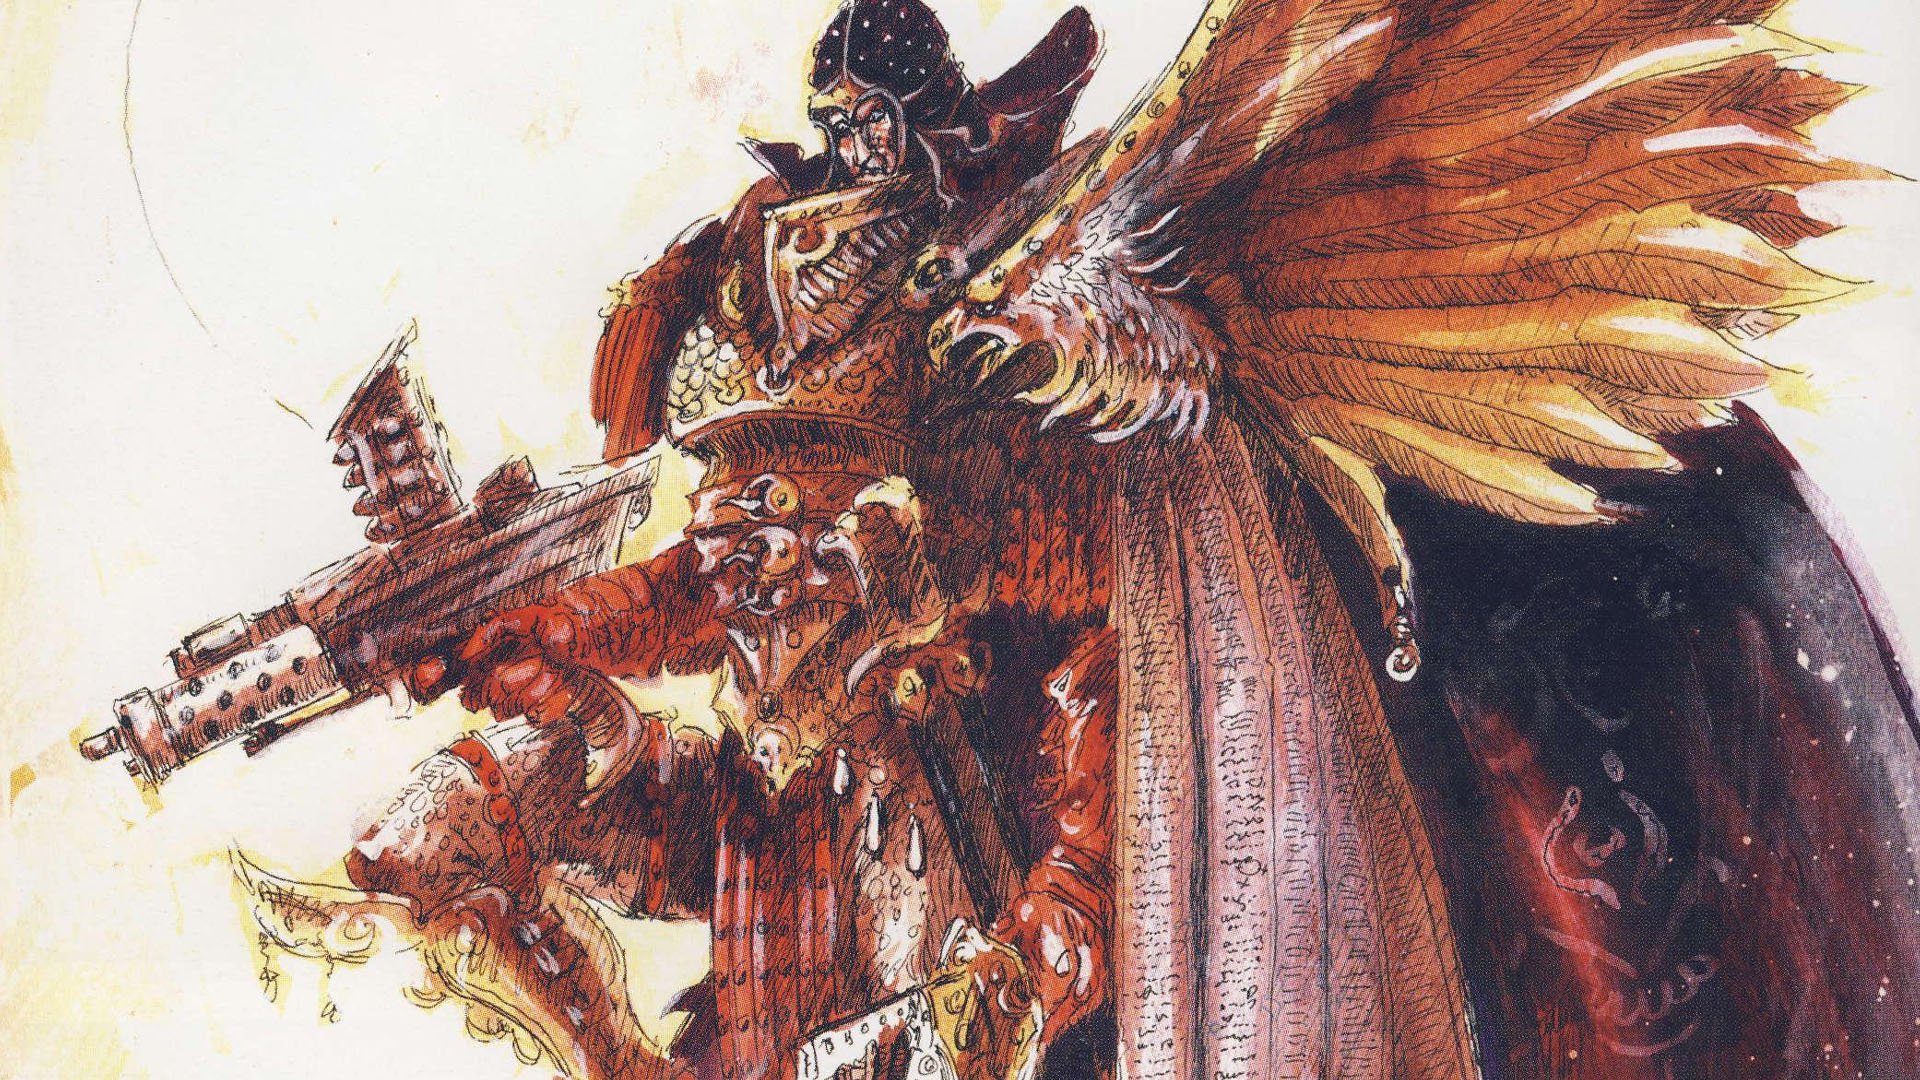 Warhammer 40k Fulgrim guide - Games Workshop image showing a classic John Blanche artwork of Fulgrim corrupted by chaos